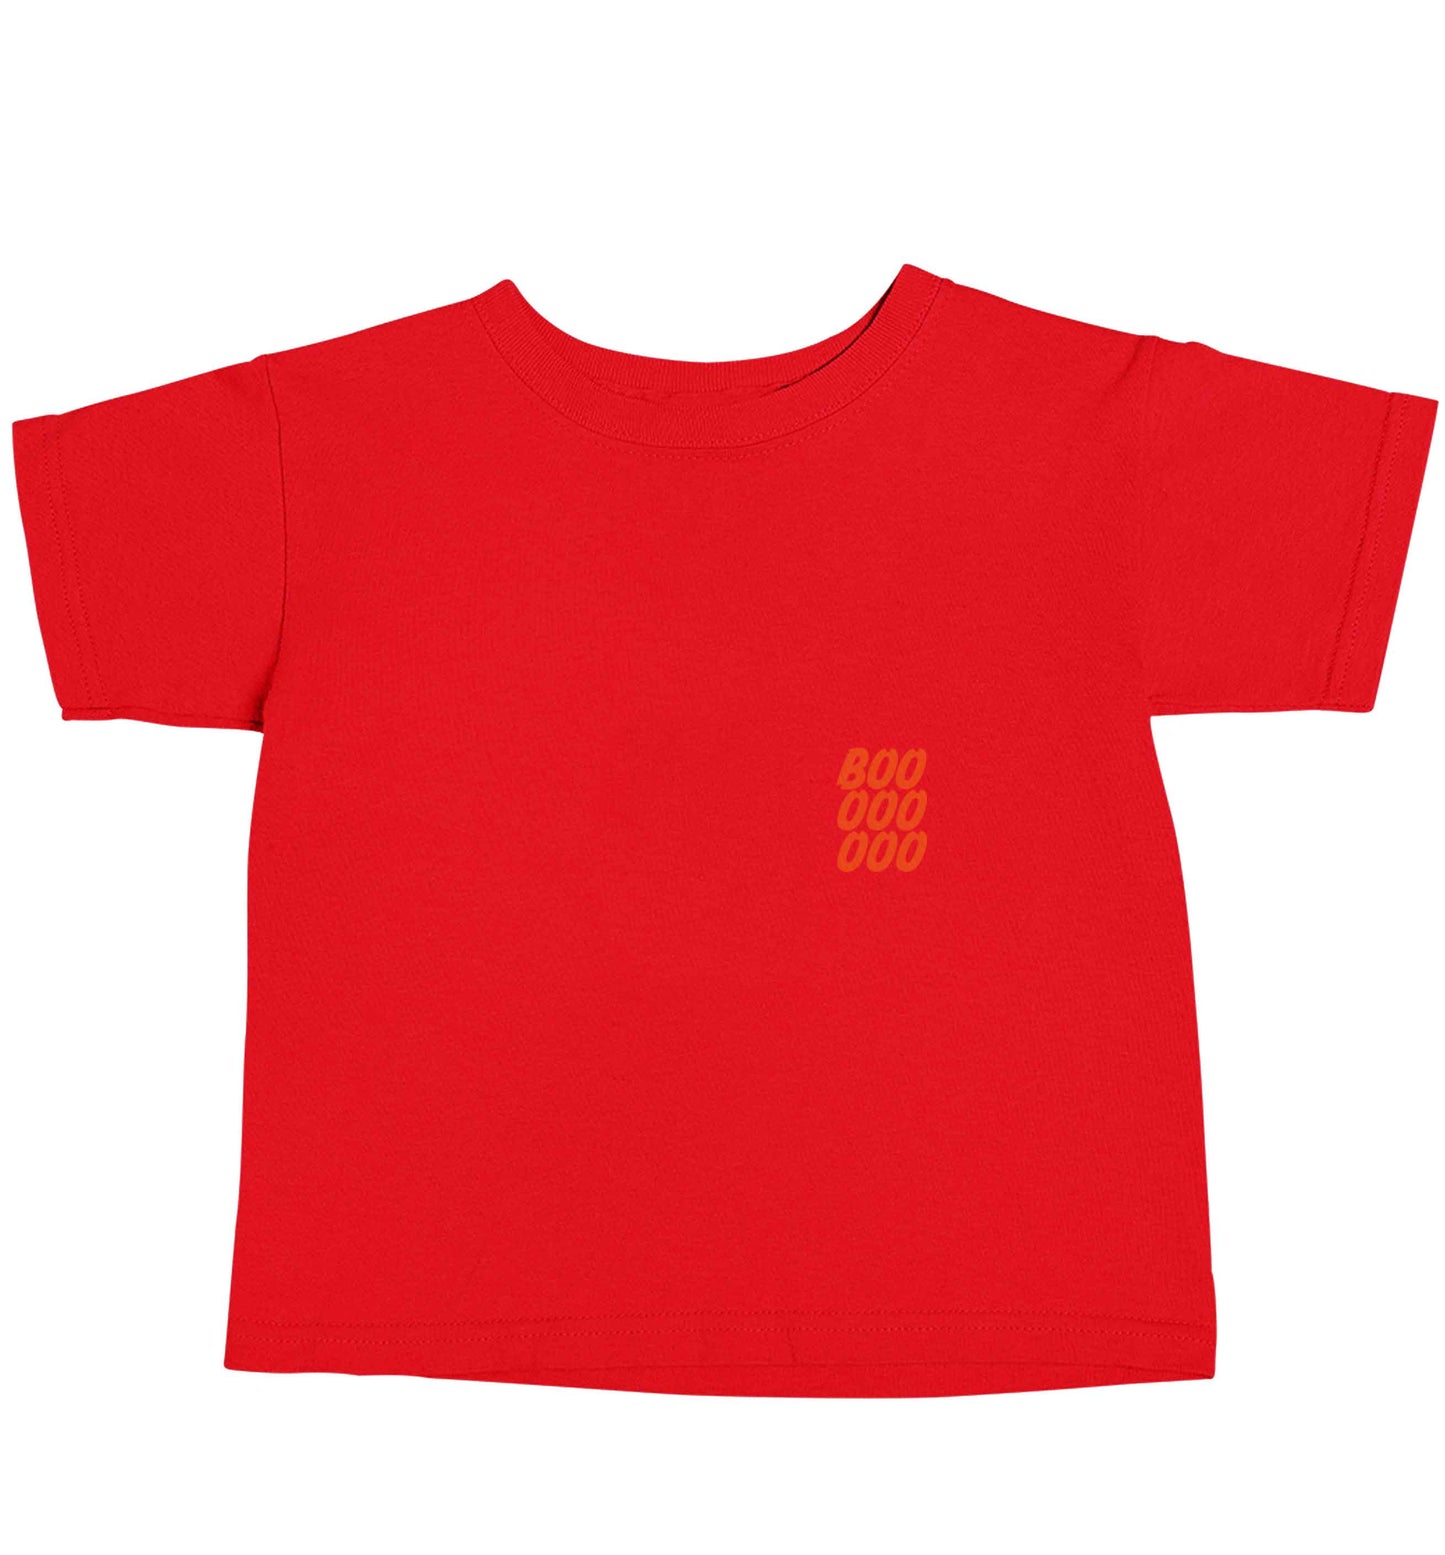 Boo pocket red baby toddler Tshirt 2 Years